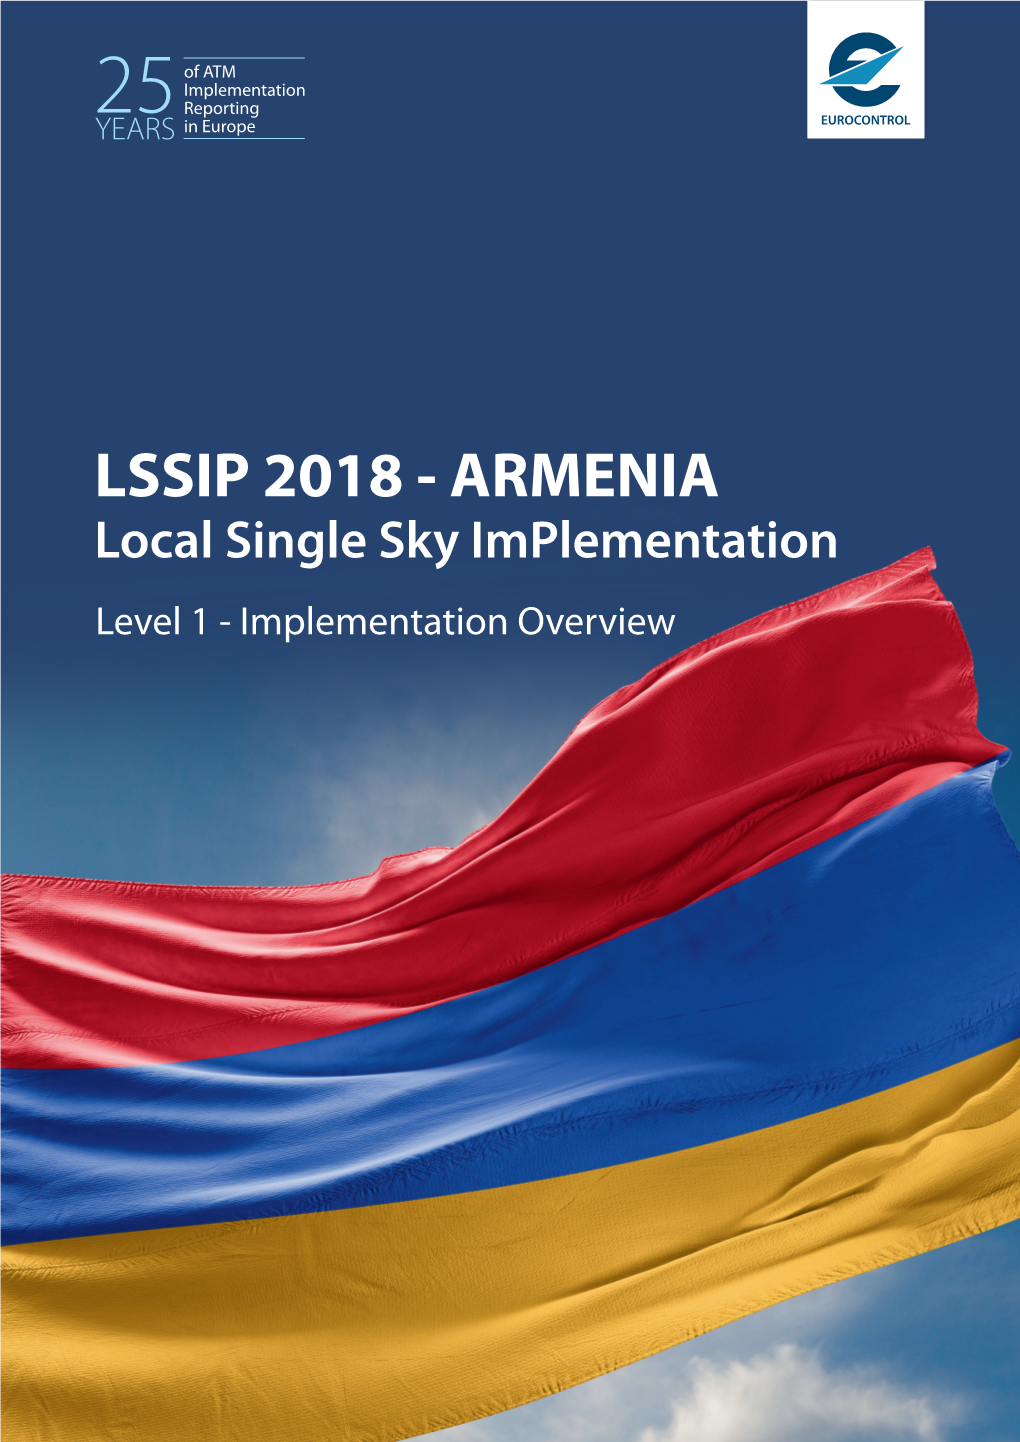 LSSIP 2018 - ARMENIA Local Single Sky Implementation Level 1 - Implementation Overview